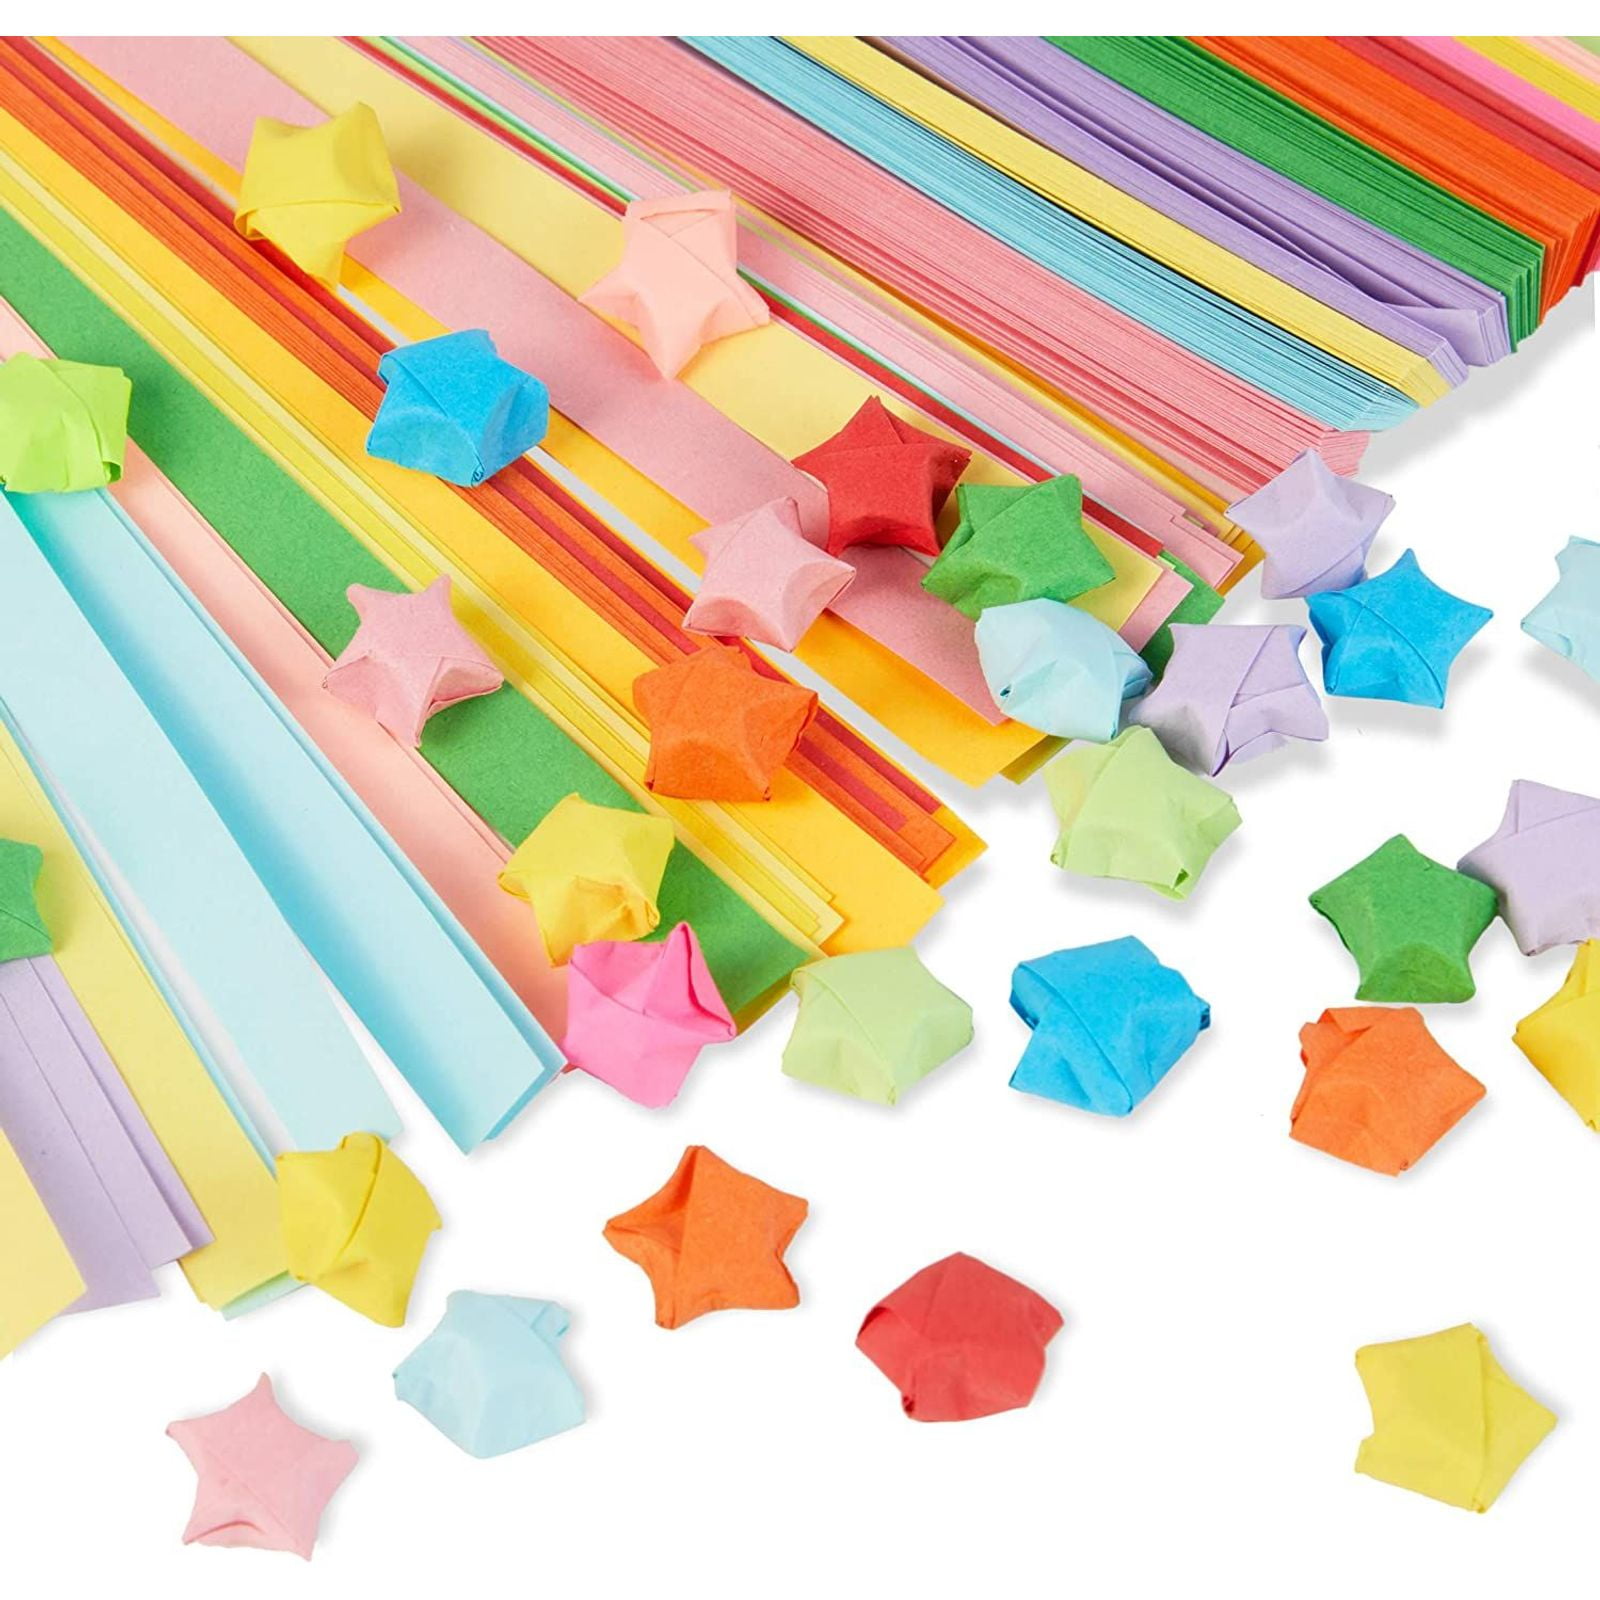 Origami Paper Strips Colorful Lucky Star Paper Quilling Paper Crafts Tools H 